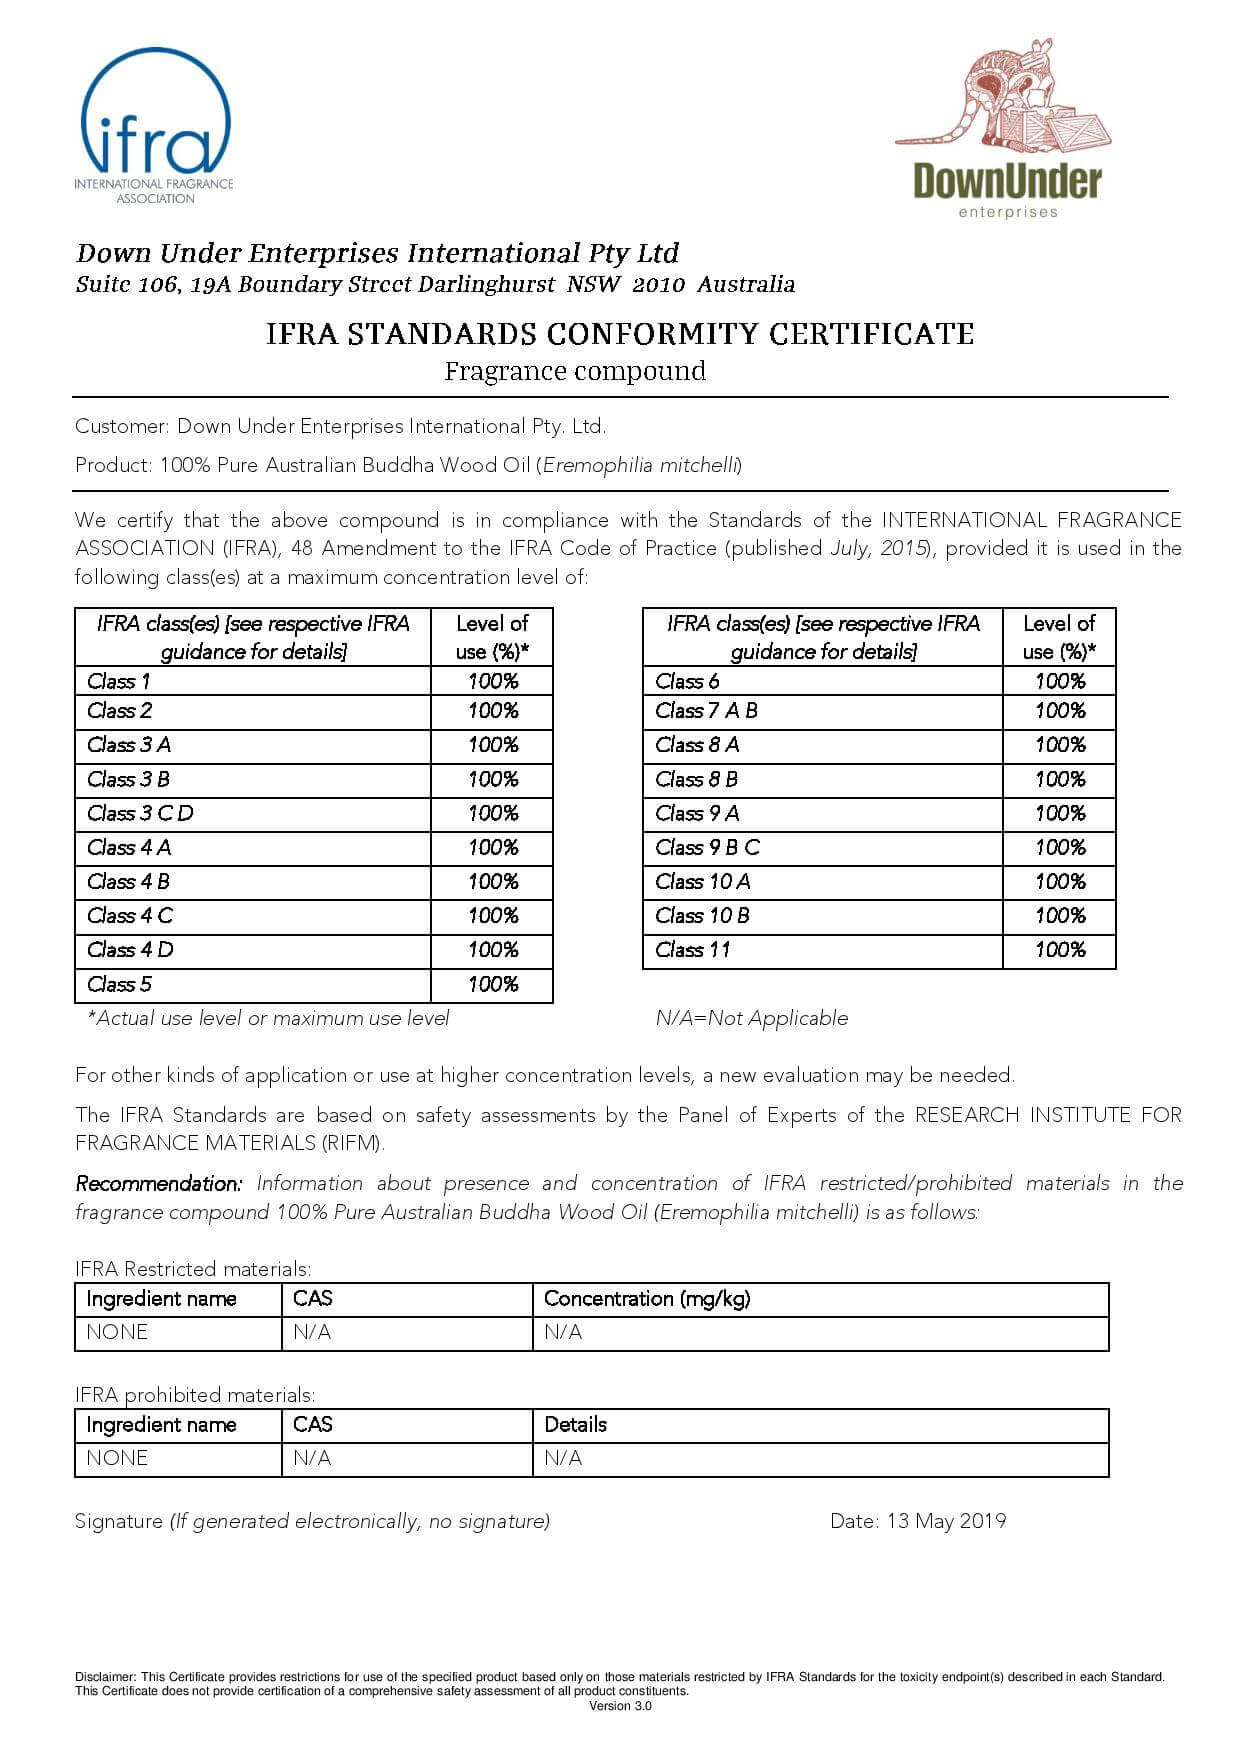 IFRA Certificate_DUE_EM_May19-page-001 (1)